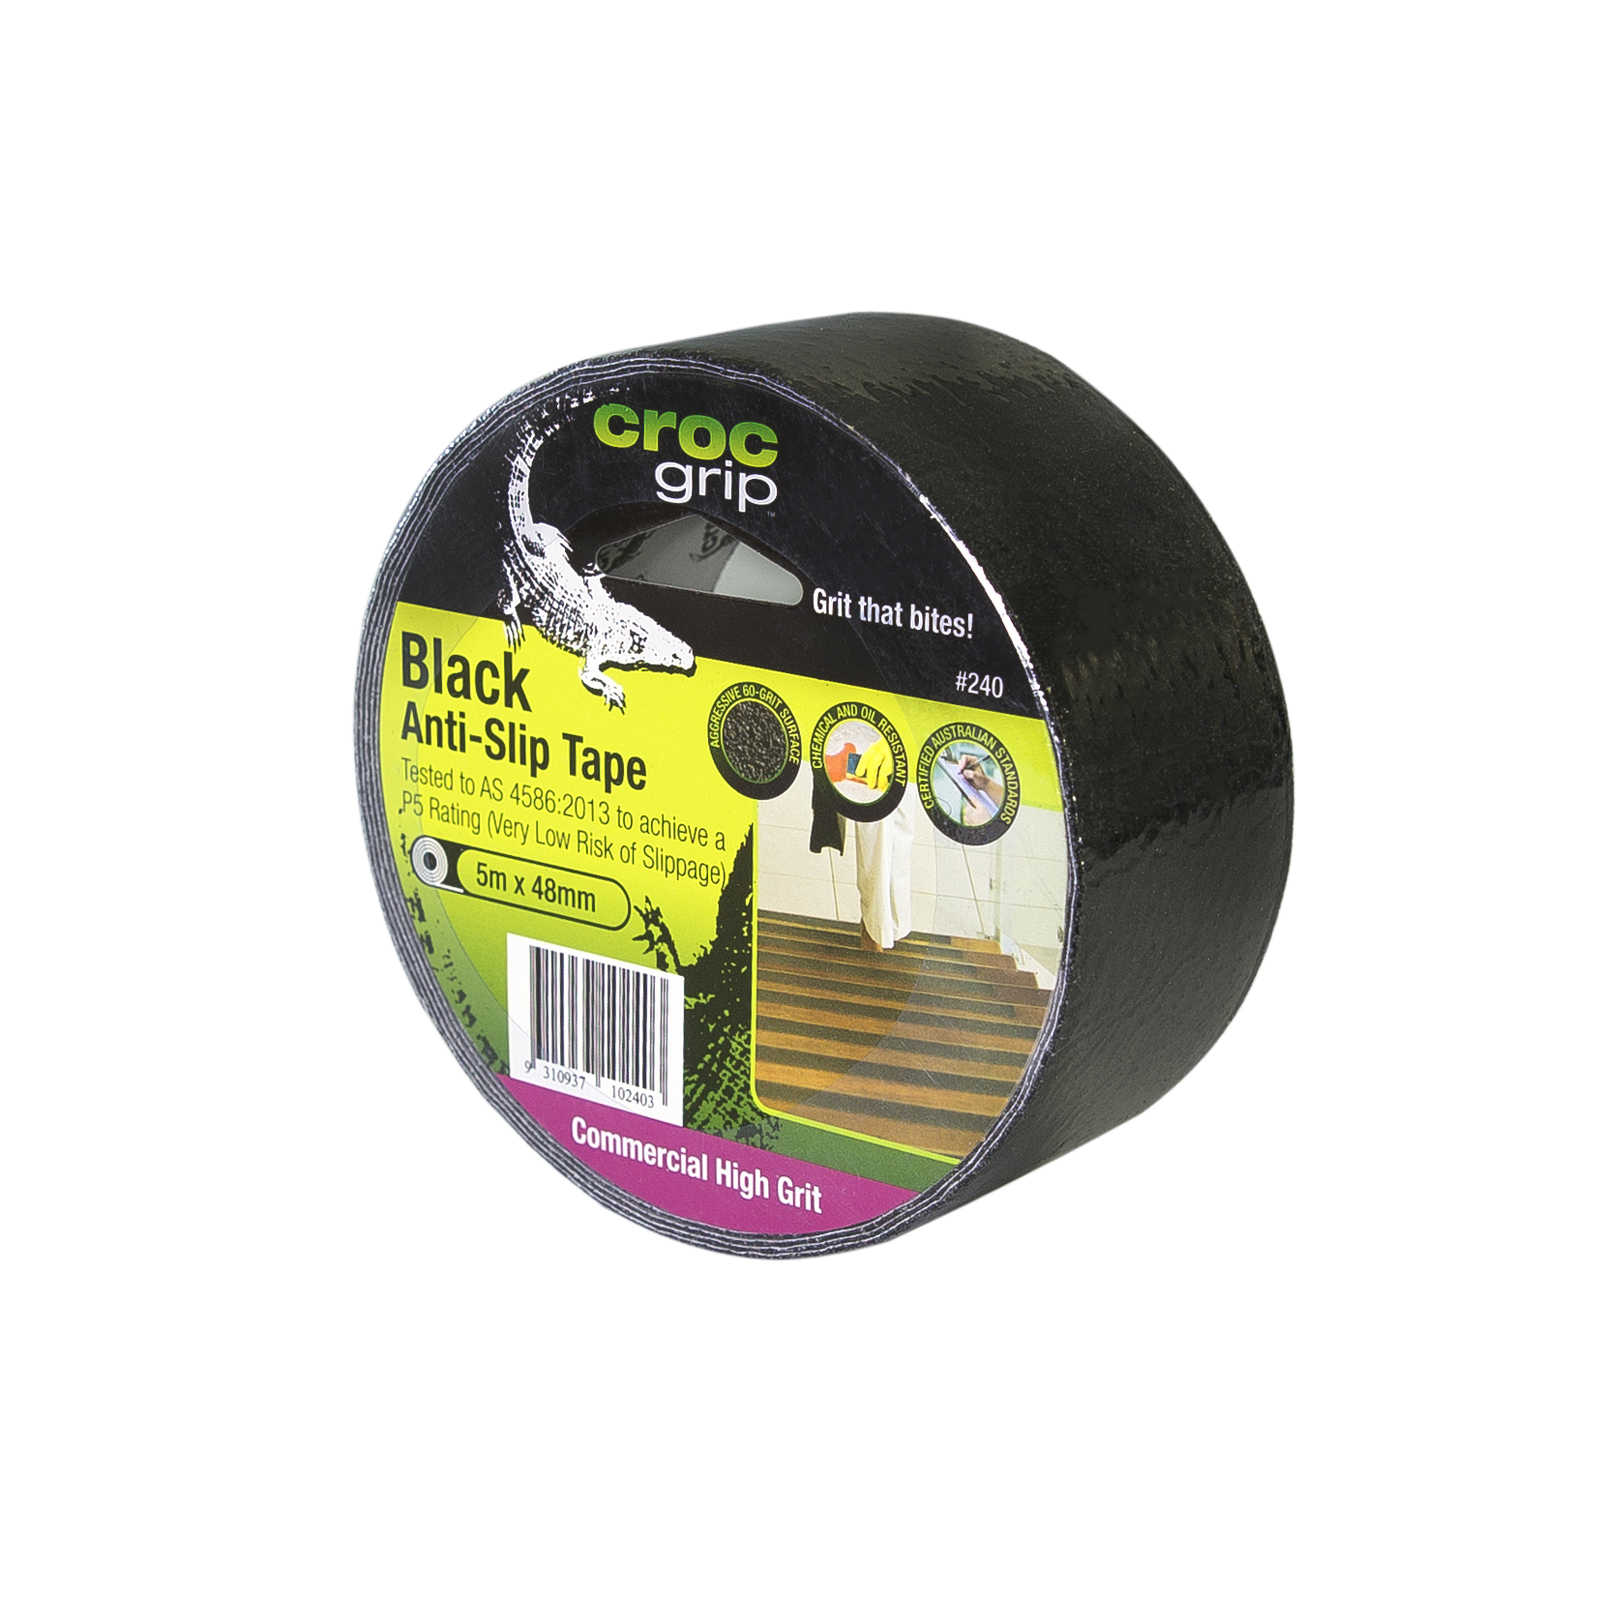 CROC grip Commercial High Grit Anti-Slip Tape, Black Tread 1.9 inches x 16.4 feet, Outdoor Weather Resistant, Safety for Stairs & Walkways